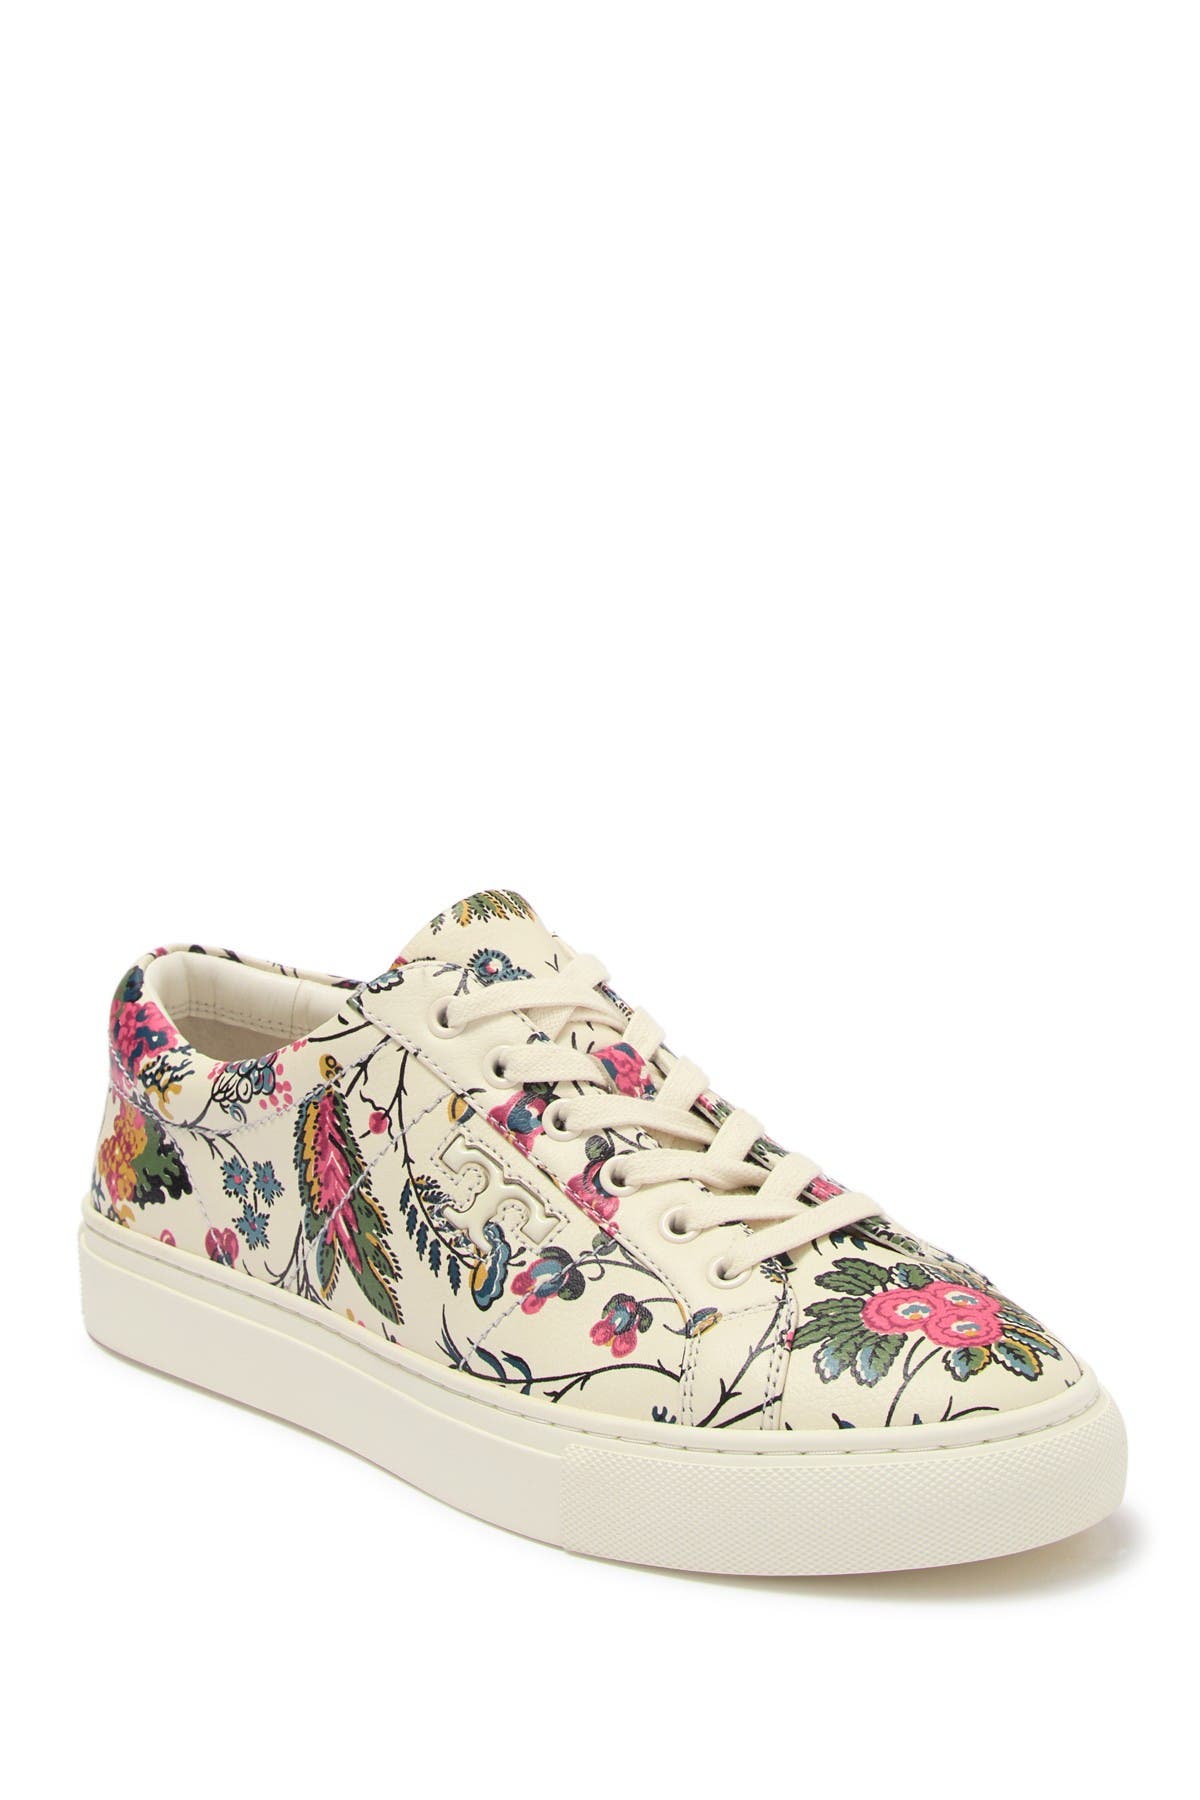 tory burch floral sneakers